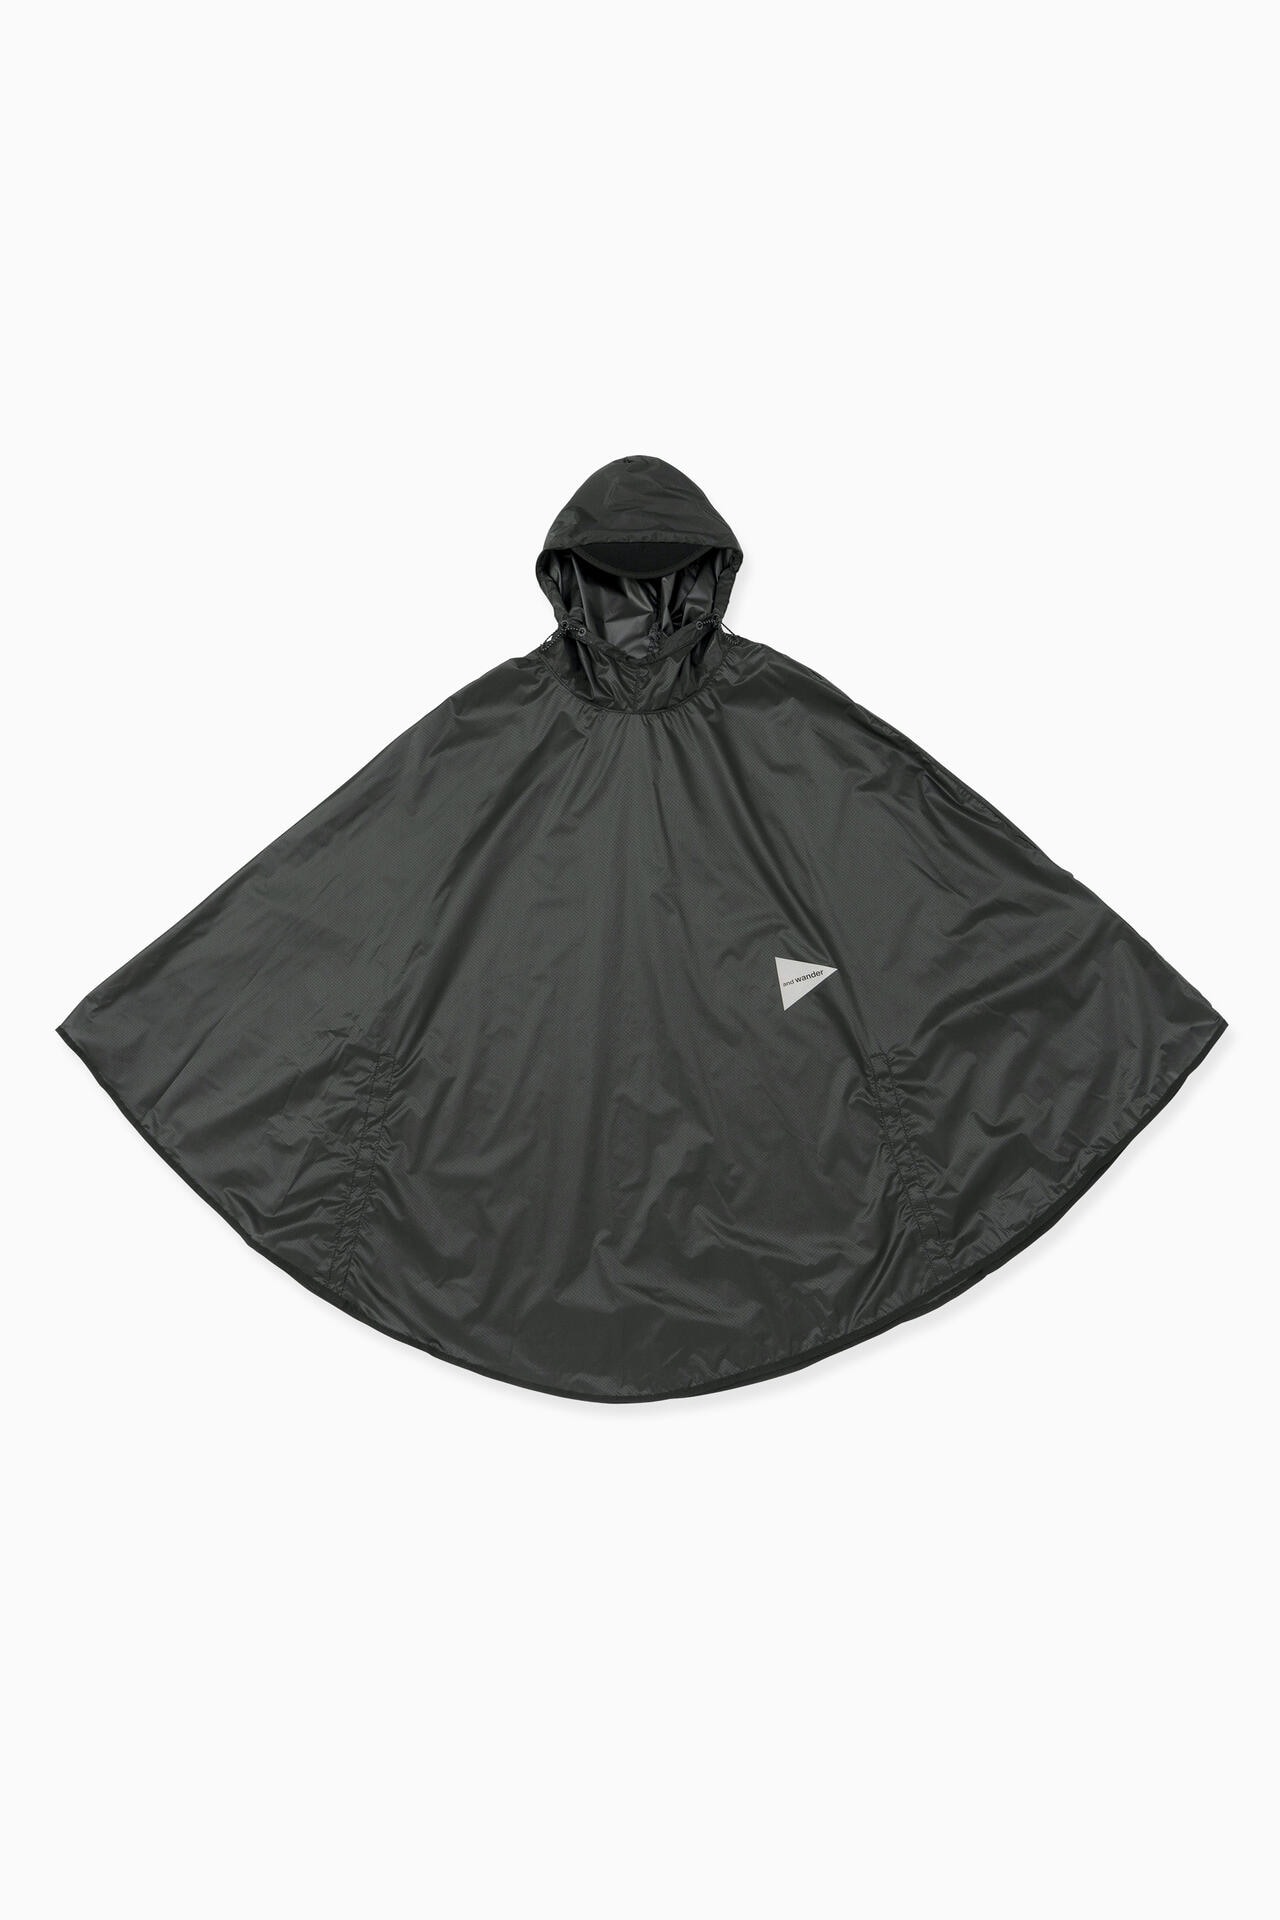 sil poncho | outerwear | and wander ONLINE STORE